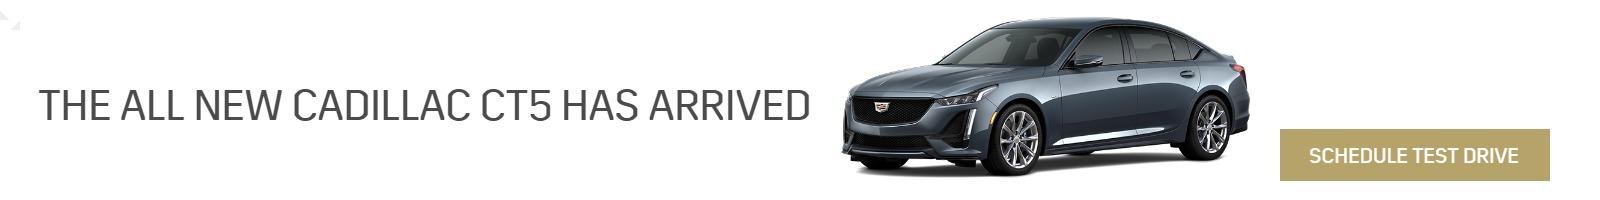 The All New Cadillac CT5 Has Arrived